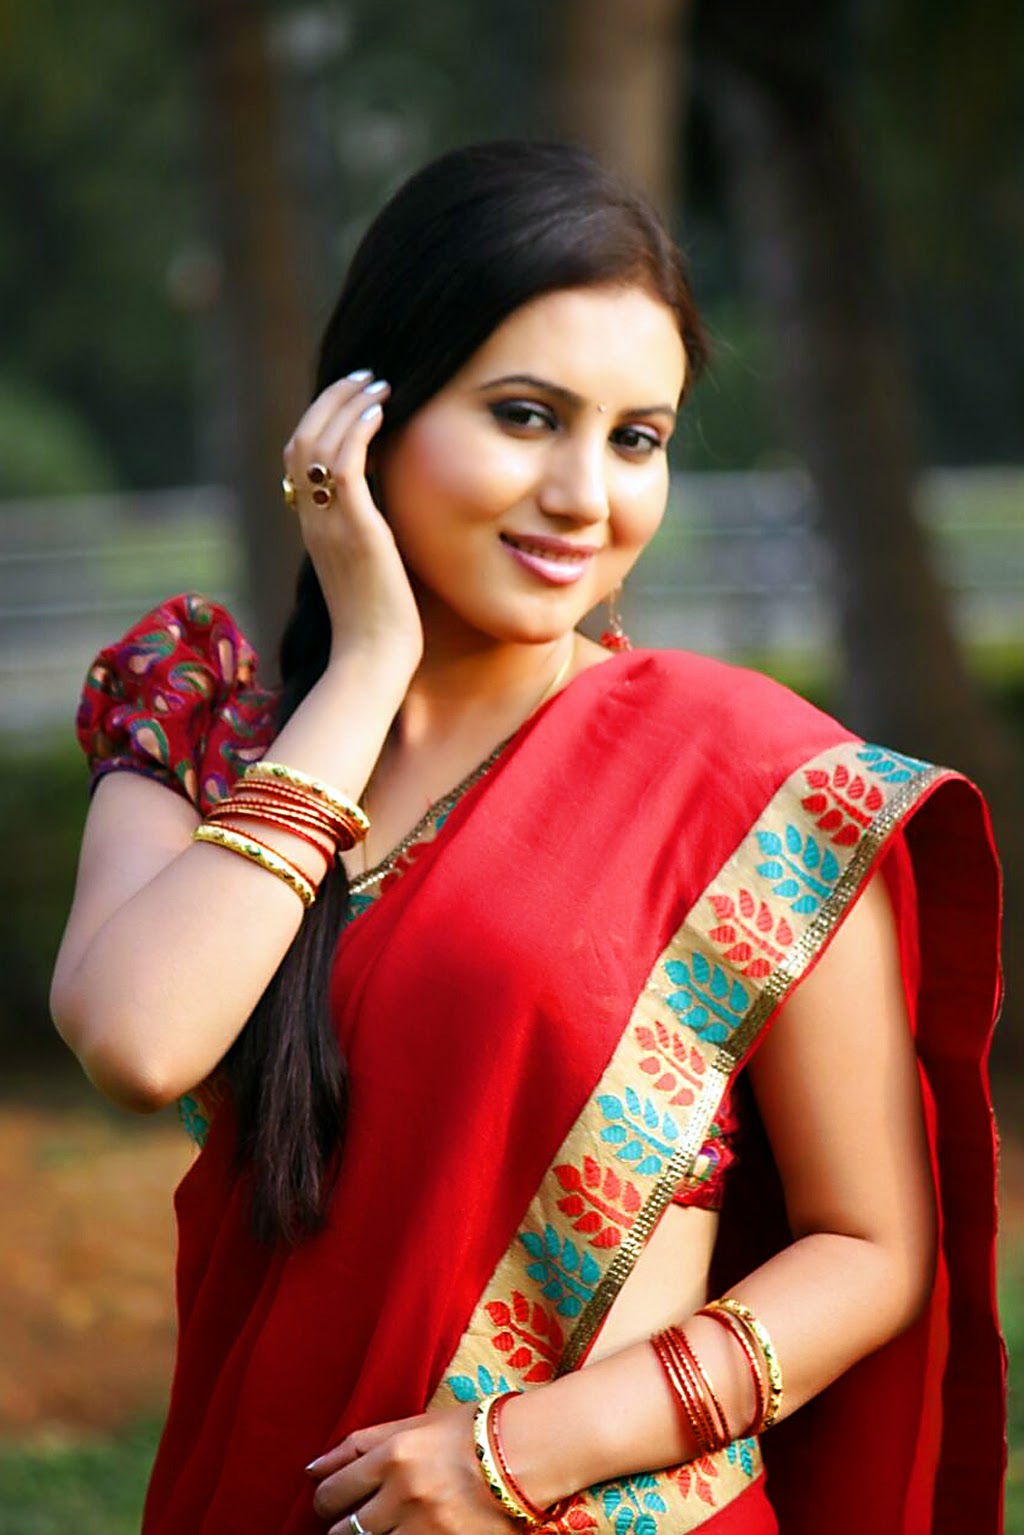 WOMEN'S E GALLERY: INDIAN WOMAN AND ACTRESS ANUSMRUTHI'S PHOTOS IN RED